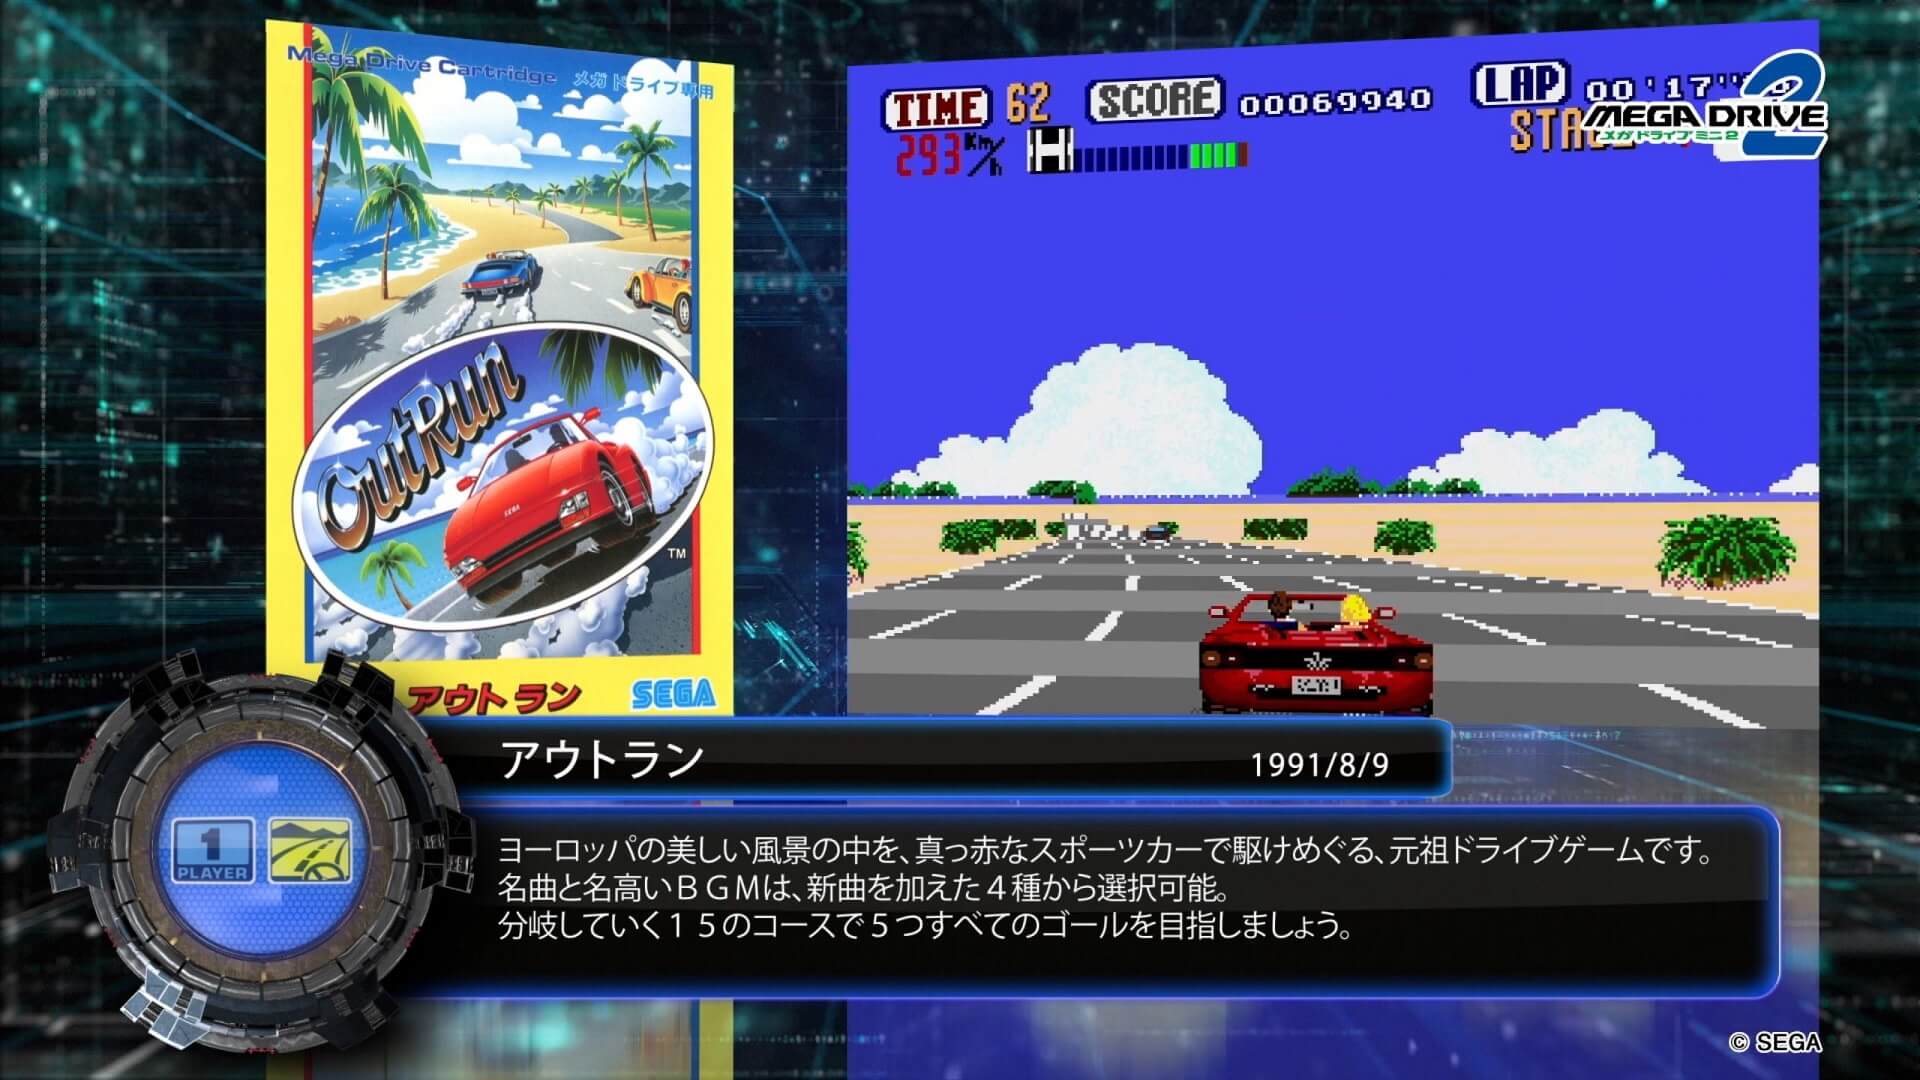 Out Run, one of the games that will be available on the Sega Genesis Mini 2